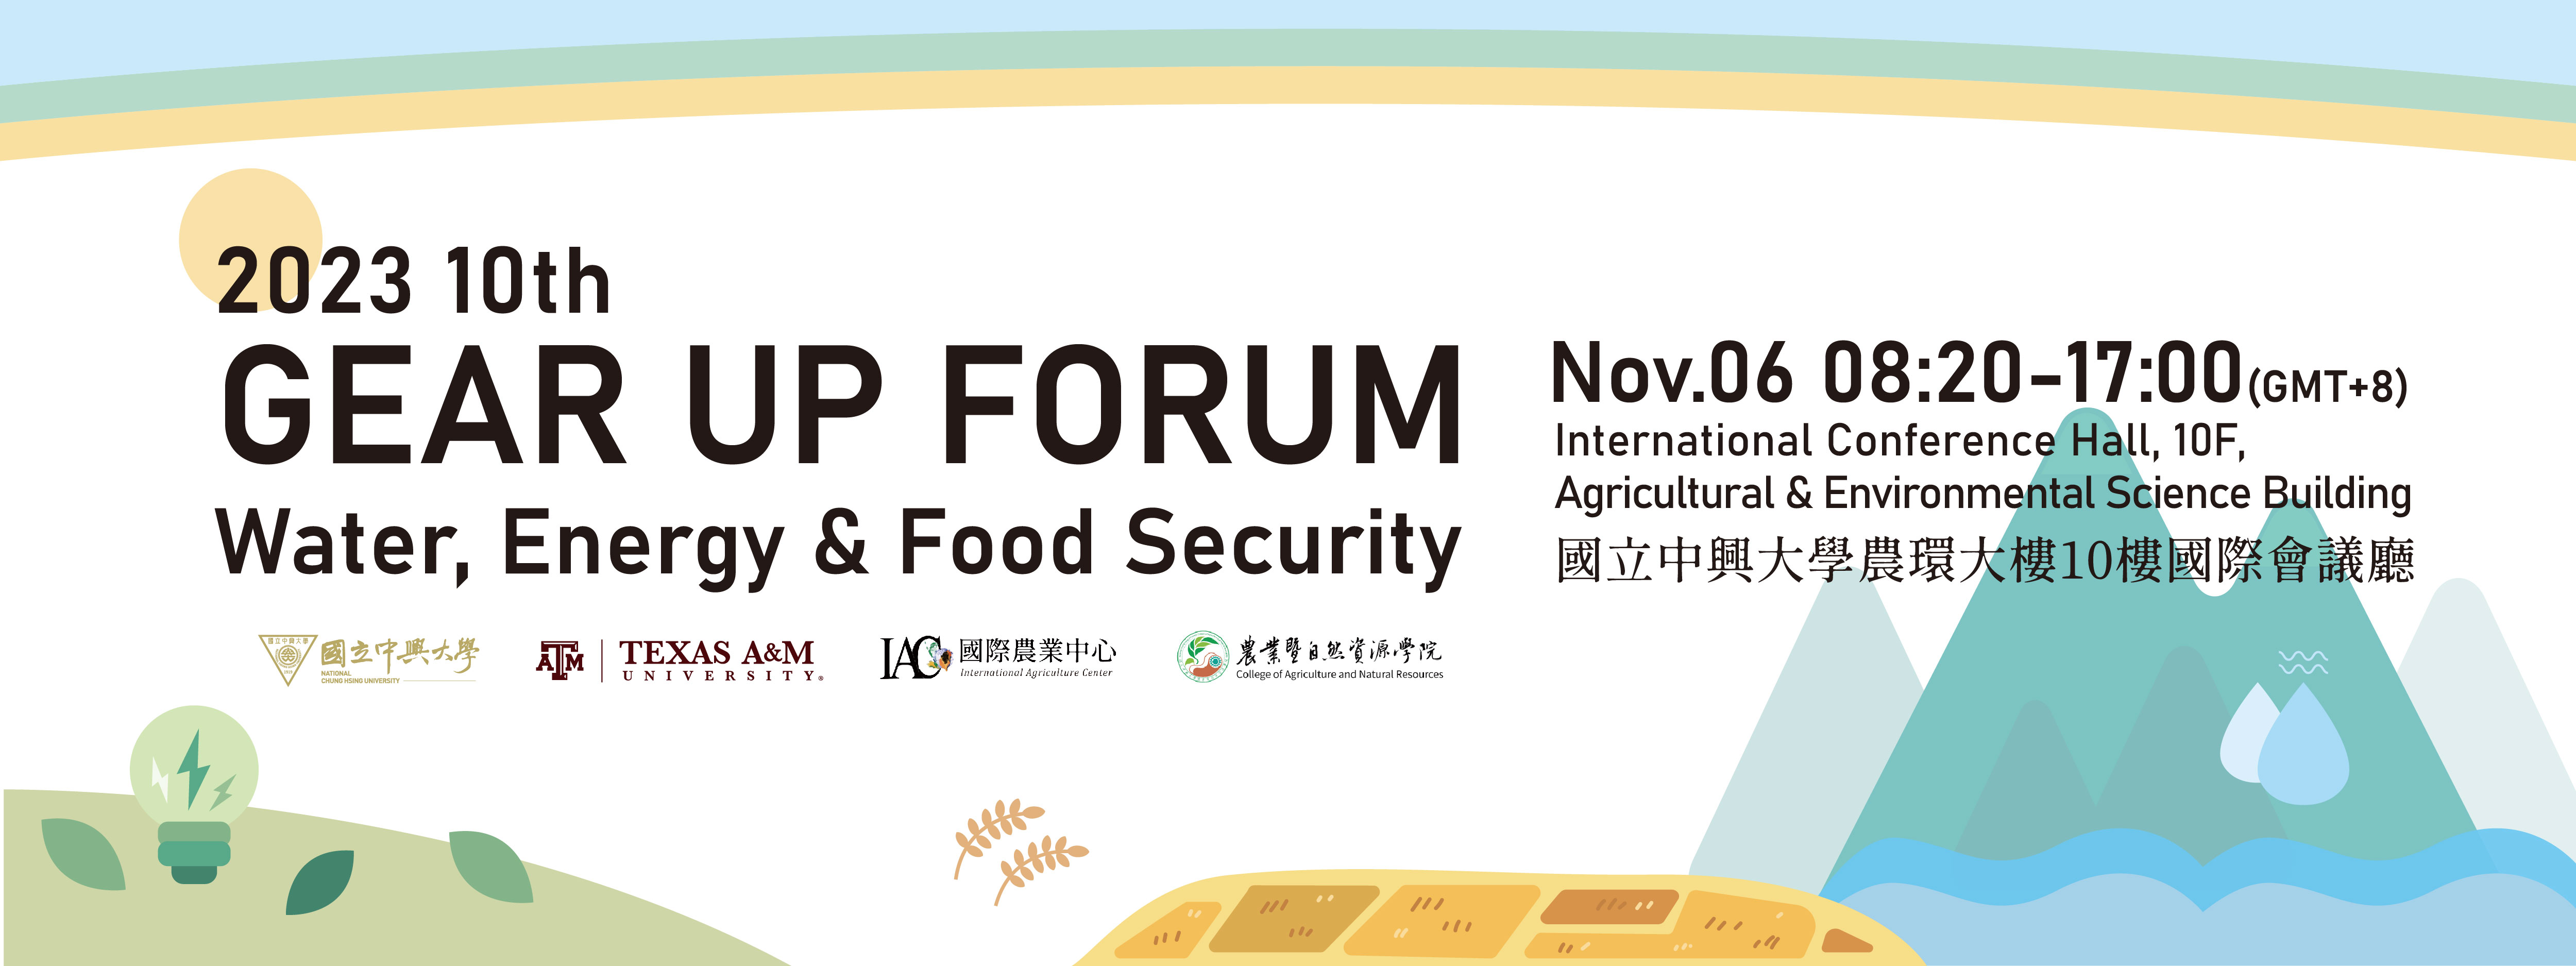 The 10th GEAR UP Forum - Water, Energy & Food Security 